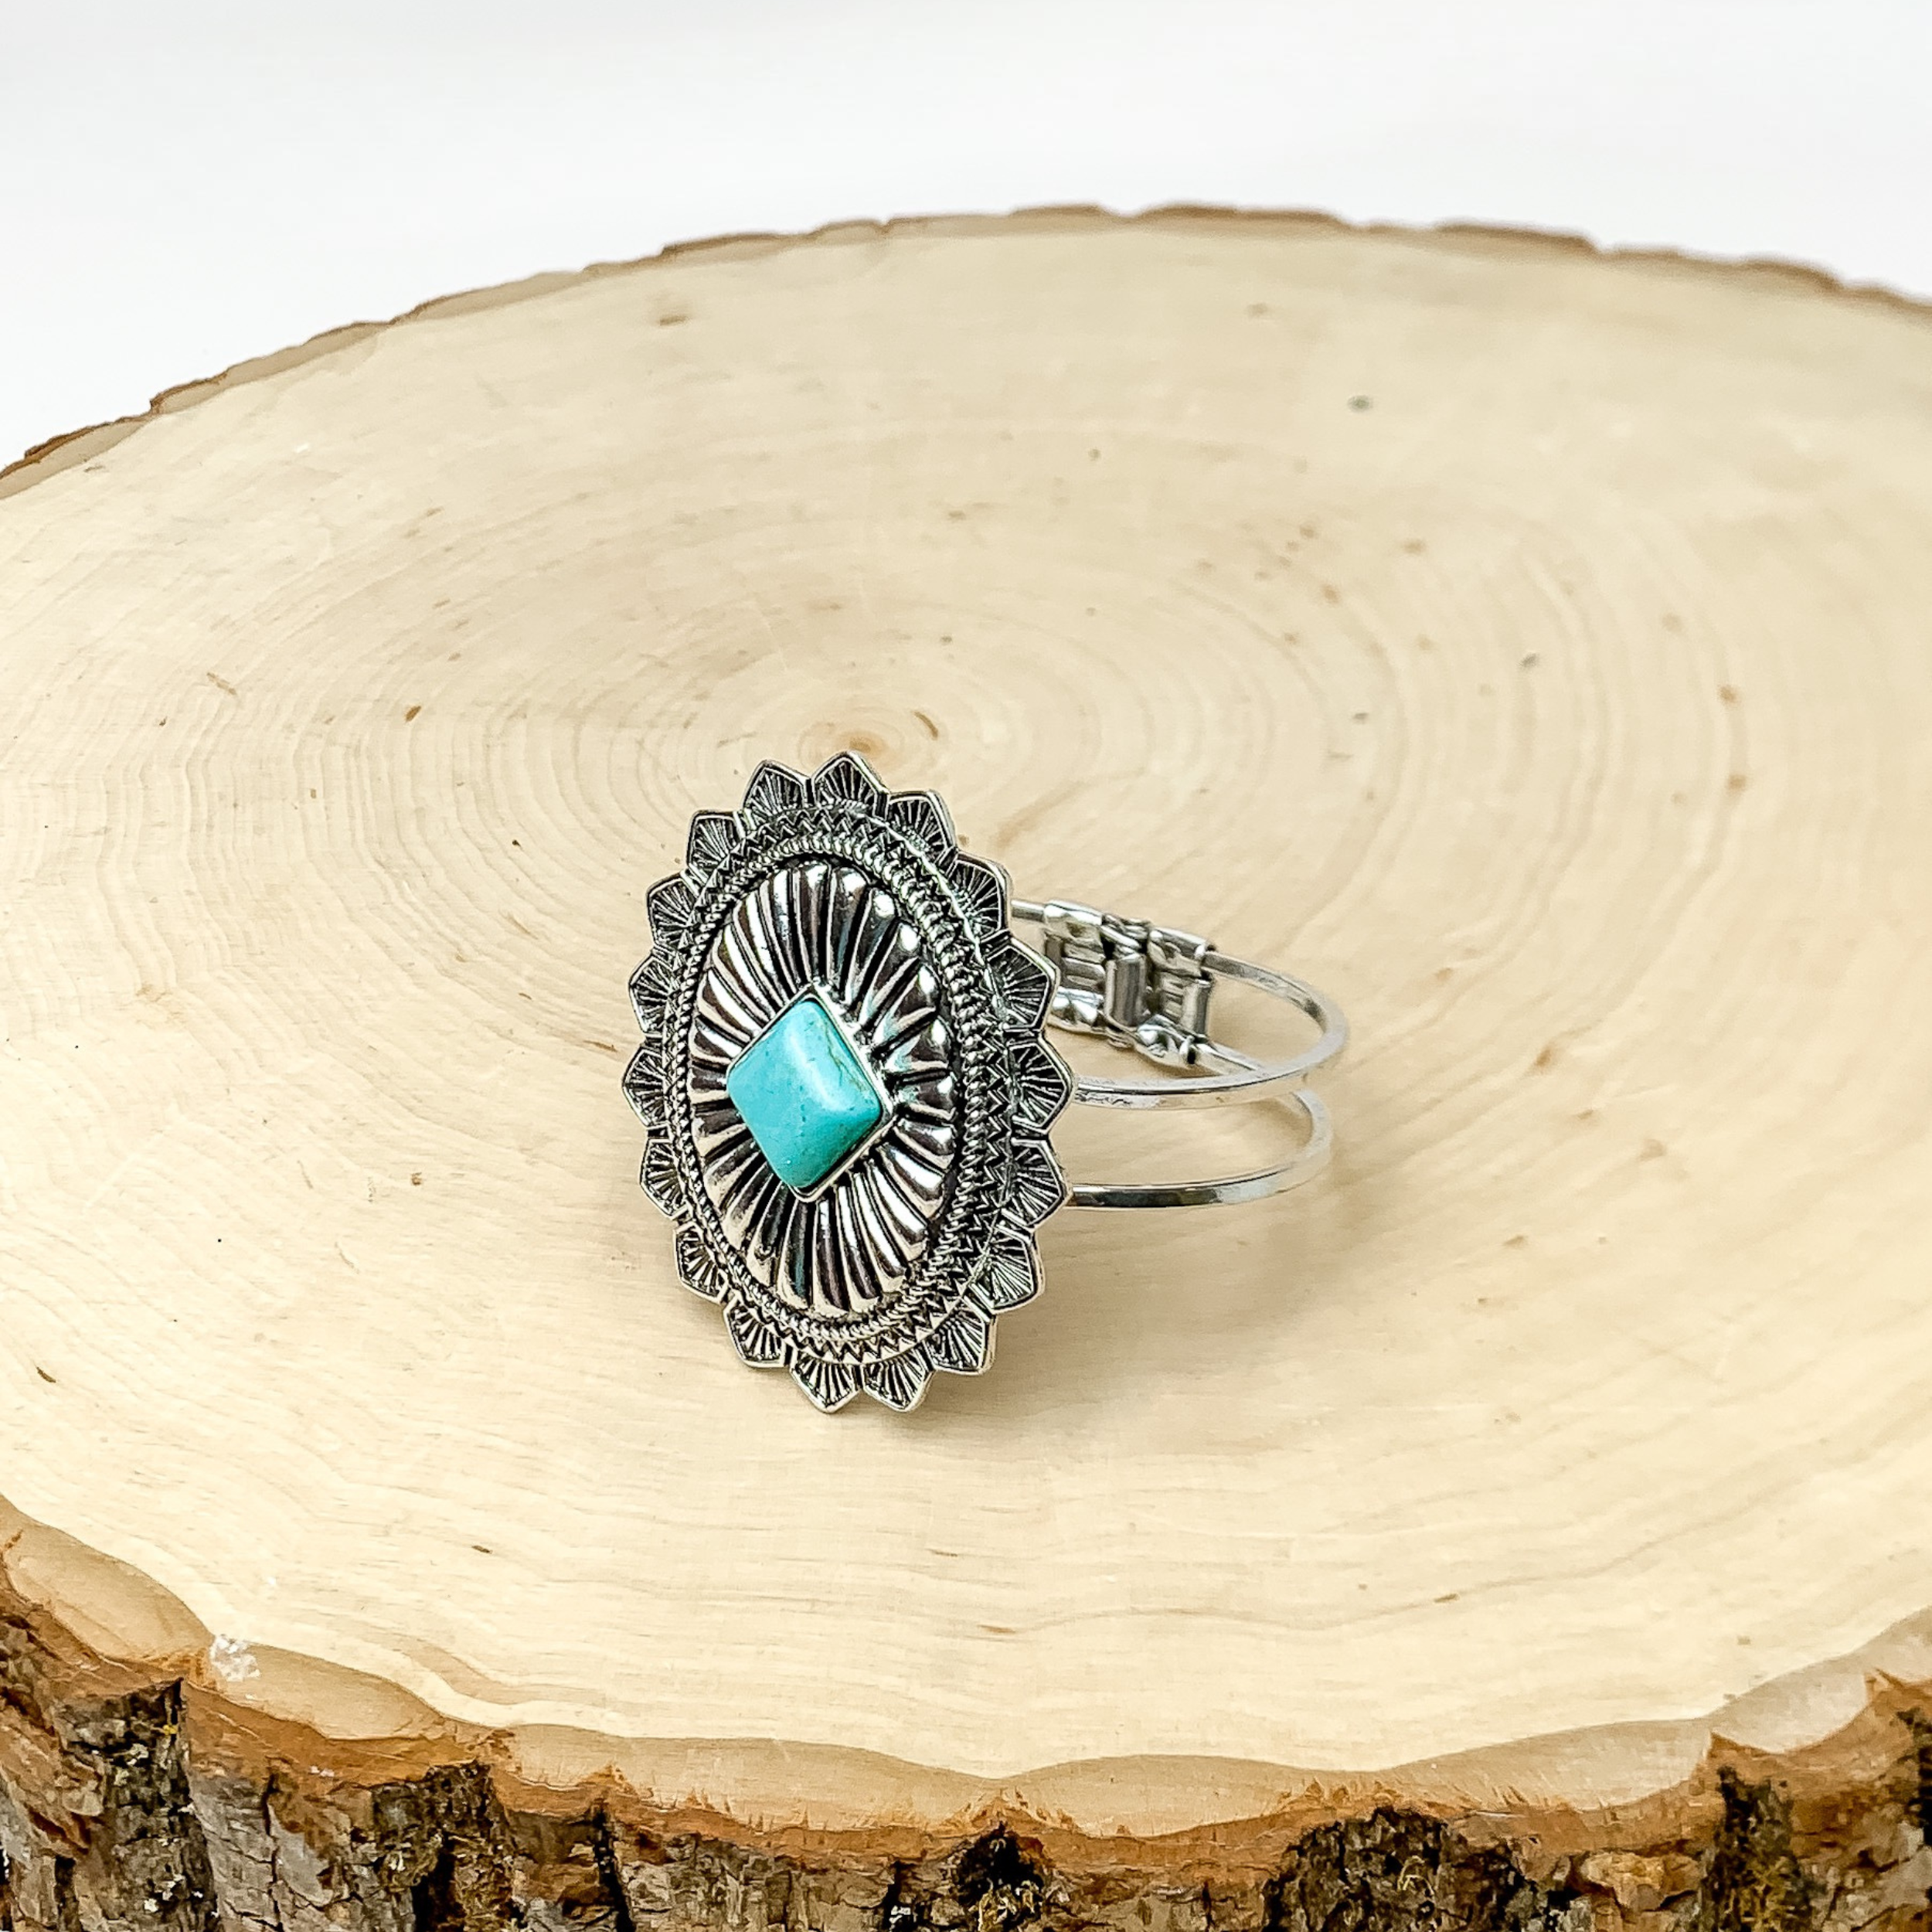 Western Oval Hinge Bracelet in Silver Tone With Turquoise Stone. Bracelet is pictured on a piece of wood with a white background behind it.